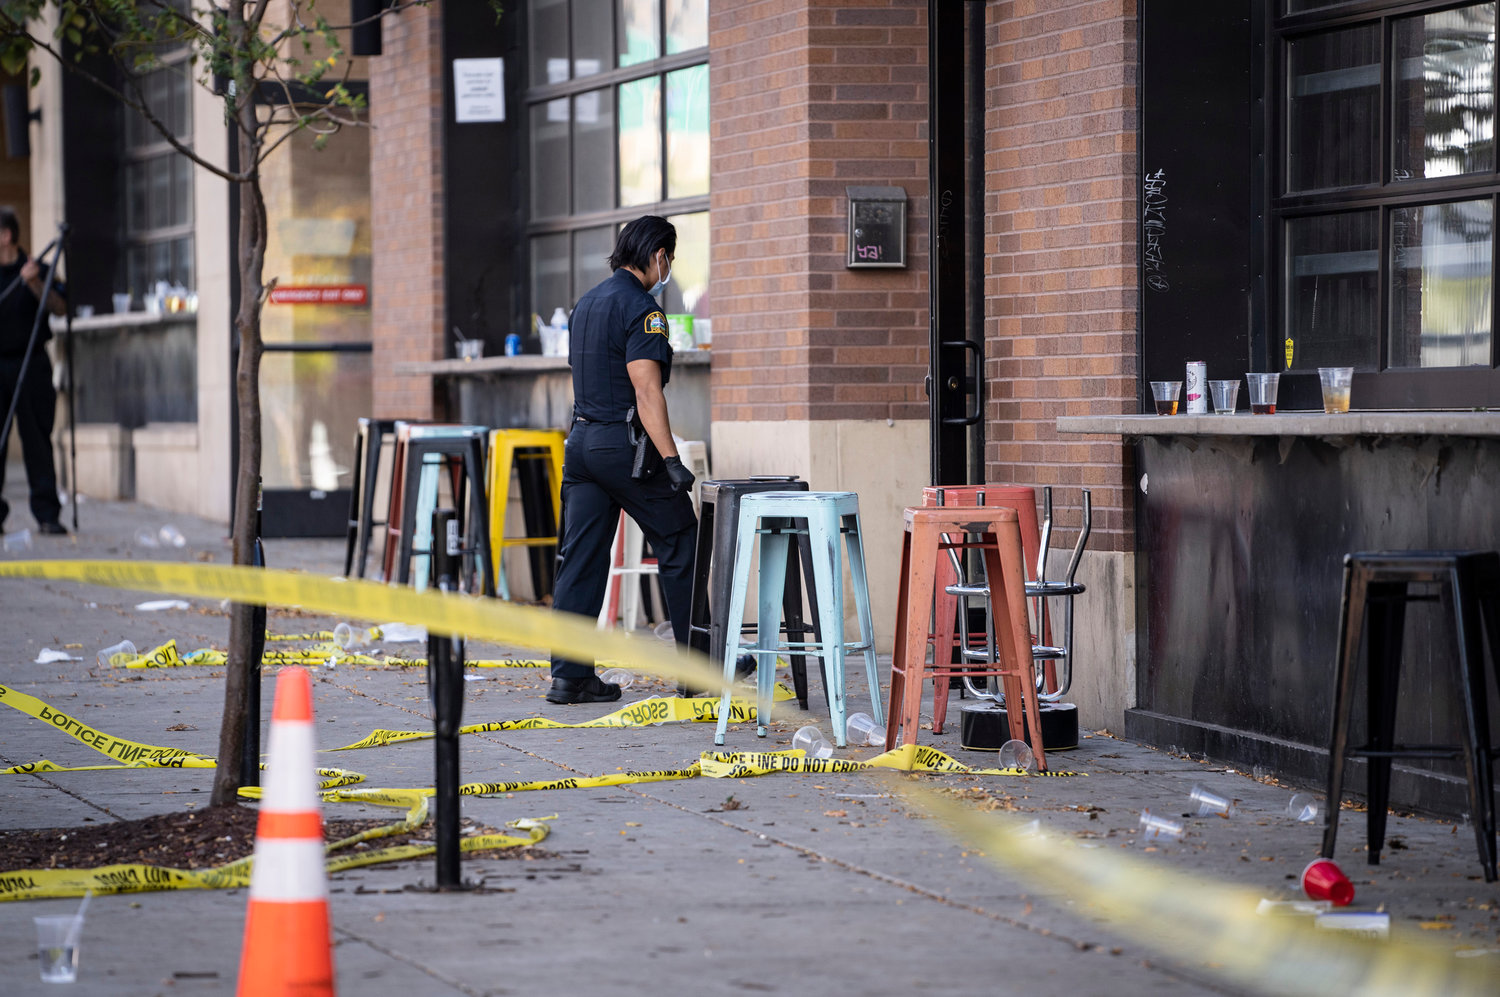 Investigators process the chaotic scene of a multiple shooting at the bar Truck Park in St. Paul, Minnesota, that happened after midnight on Sunday, Oct. 10, 2021. (Renee Jones Schneider/Minneapolis Star Tribune/TNS)